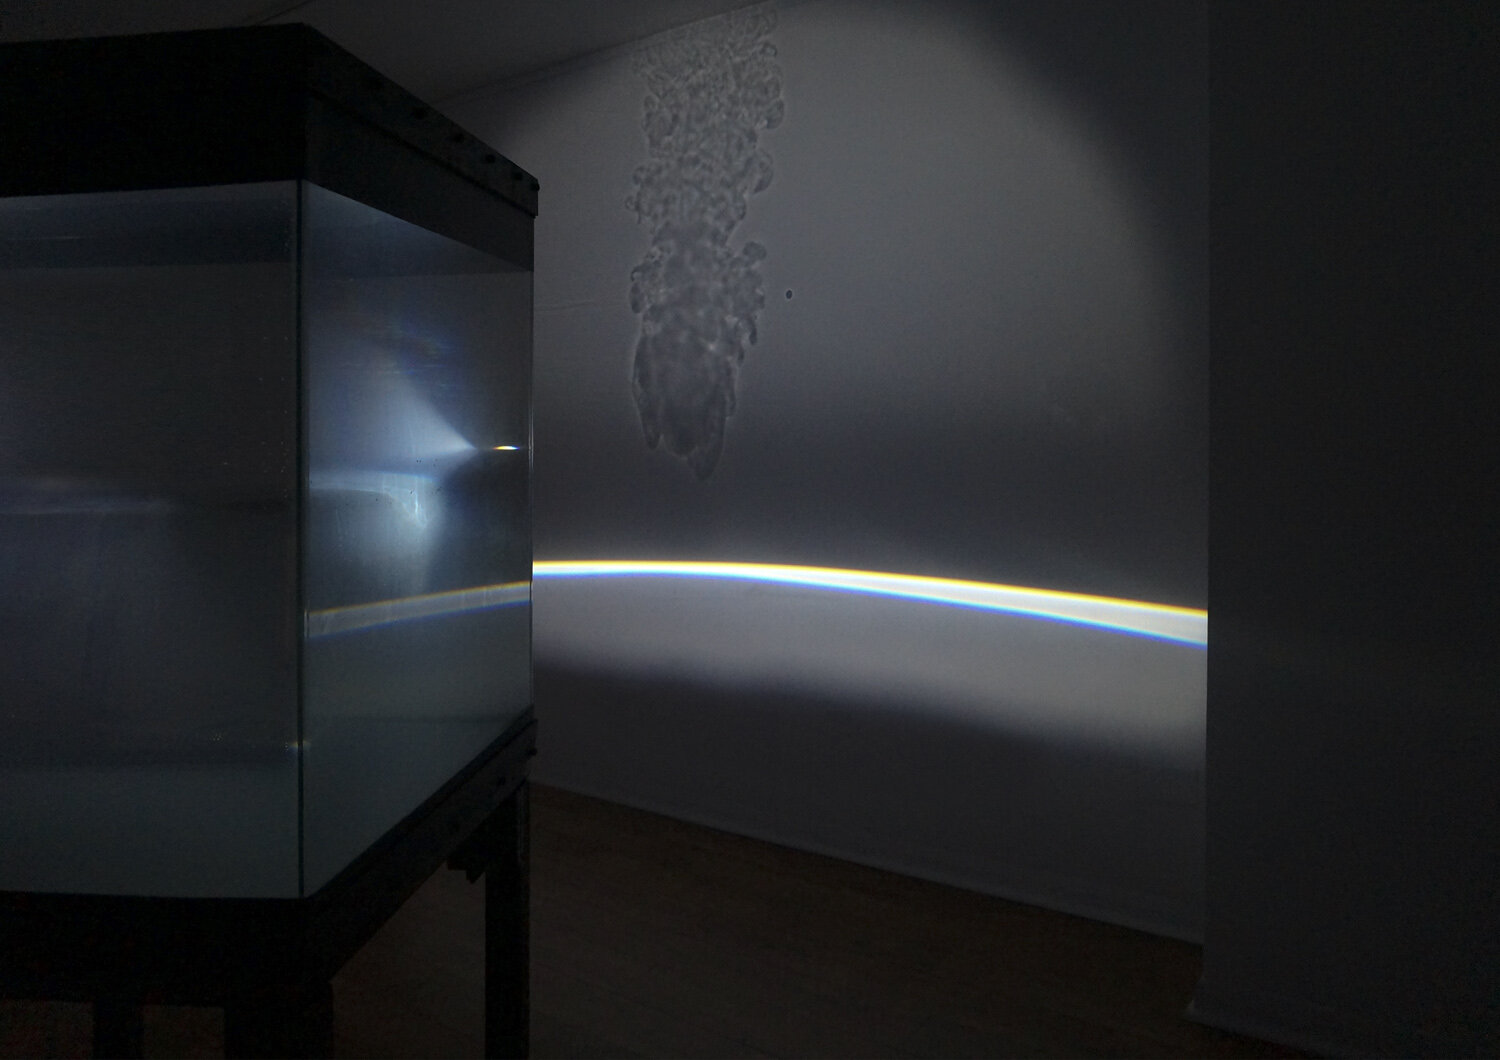 Investigation on oceanic clues, Installation view, Lost in Fathoms, Curator: Robert Devcic, GV Art Gallery, London